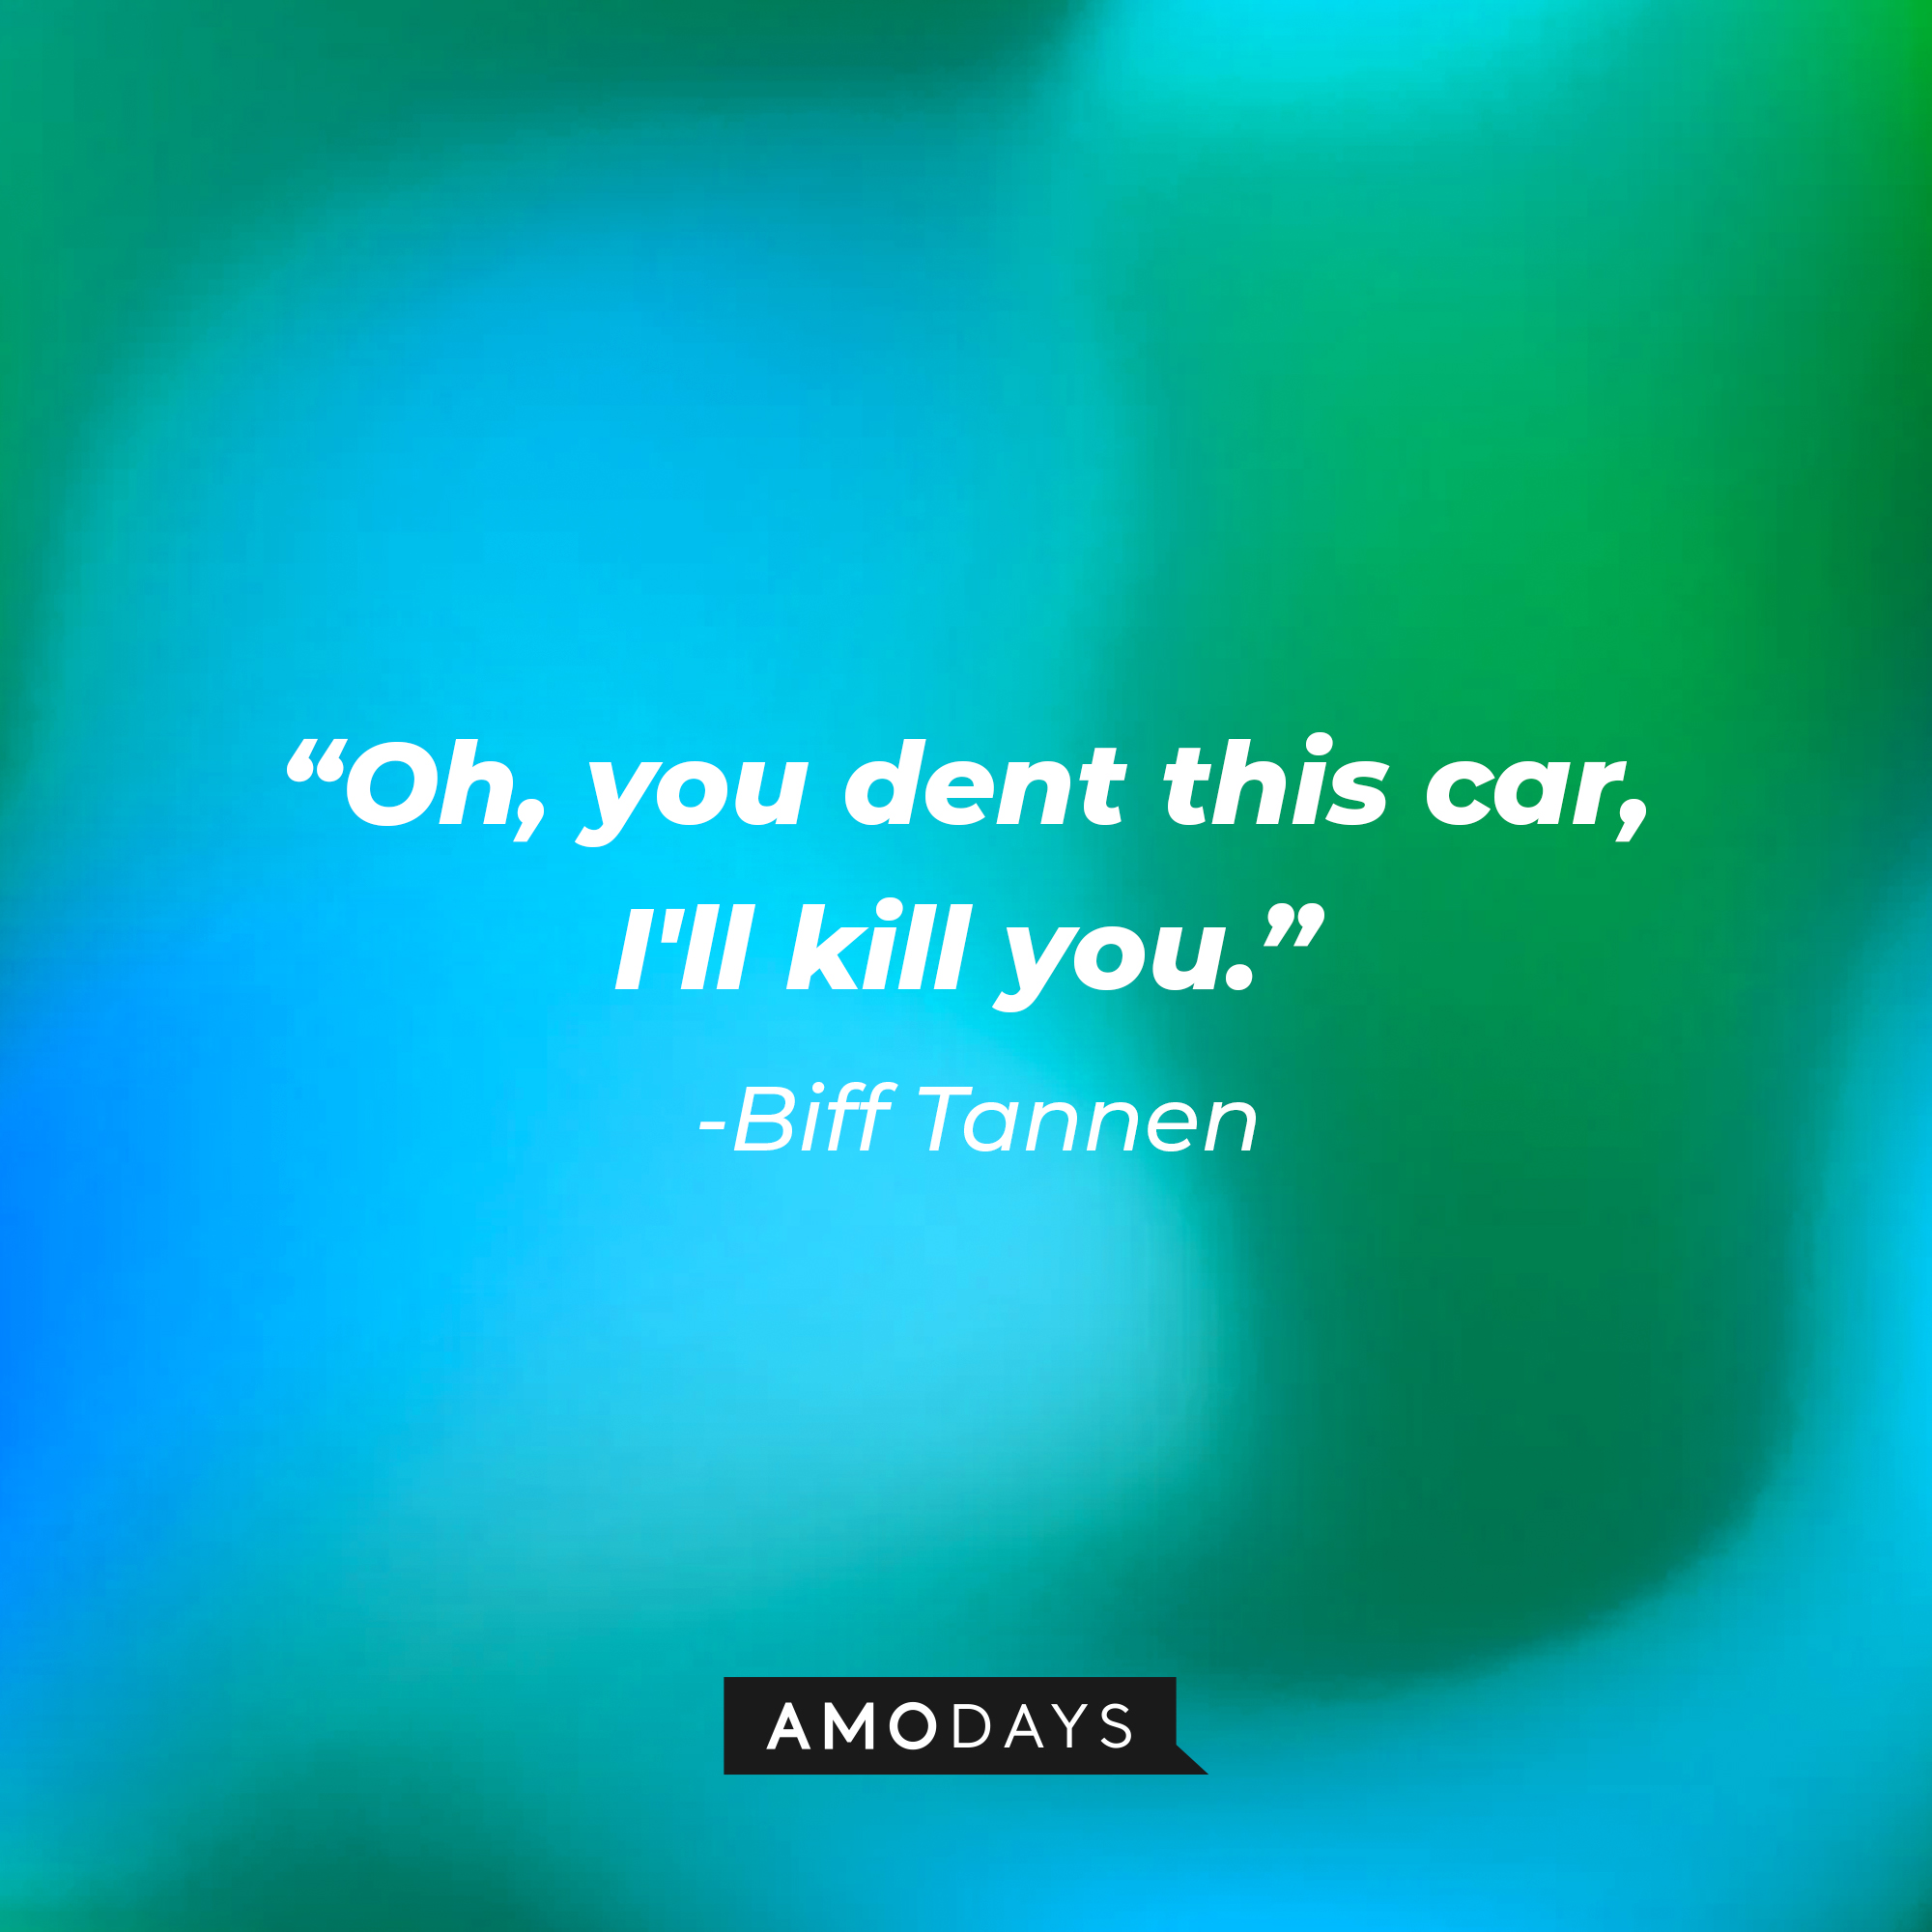 Biff Tannen’s quote: “Oh, you dent this car, I'll kill you.” | Source: AmoDays